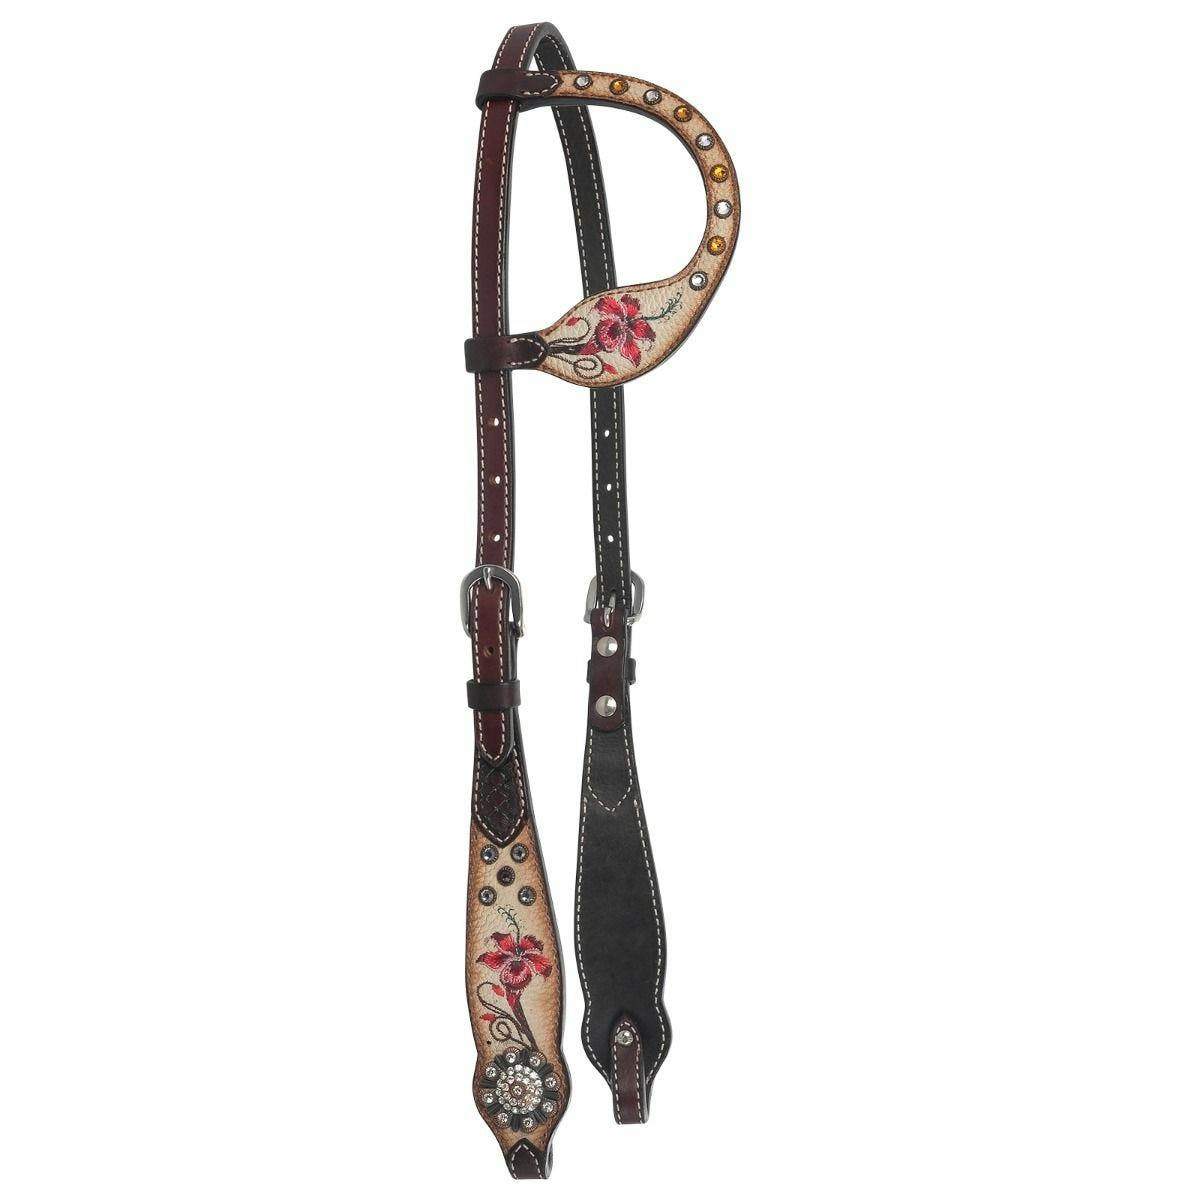 Fire Lily One Ear Headstall